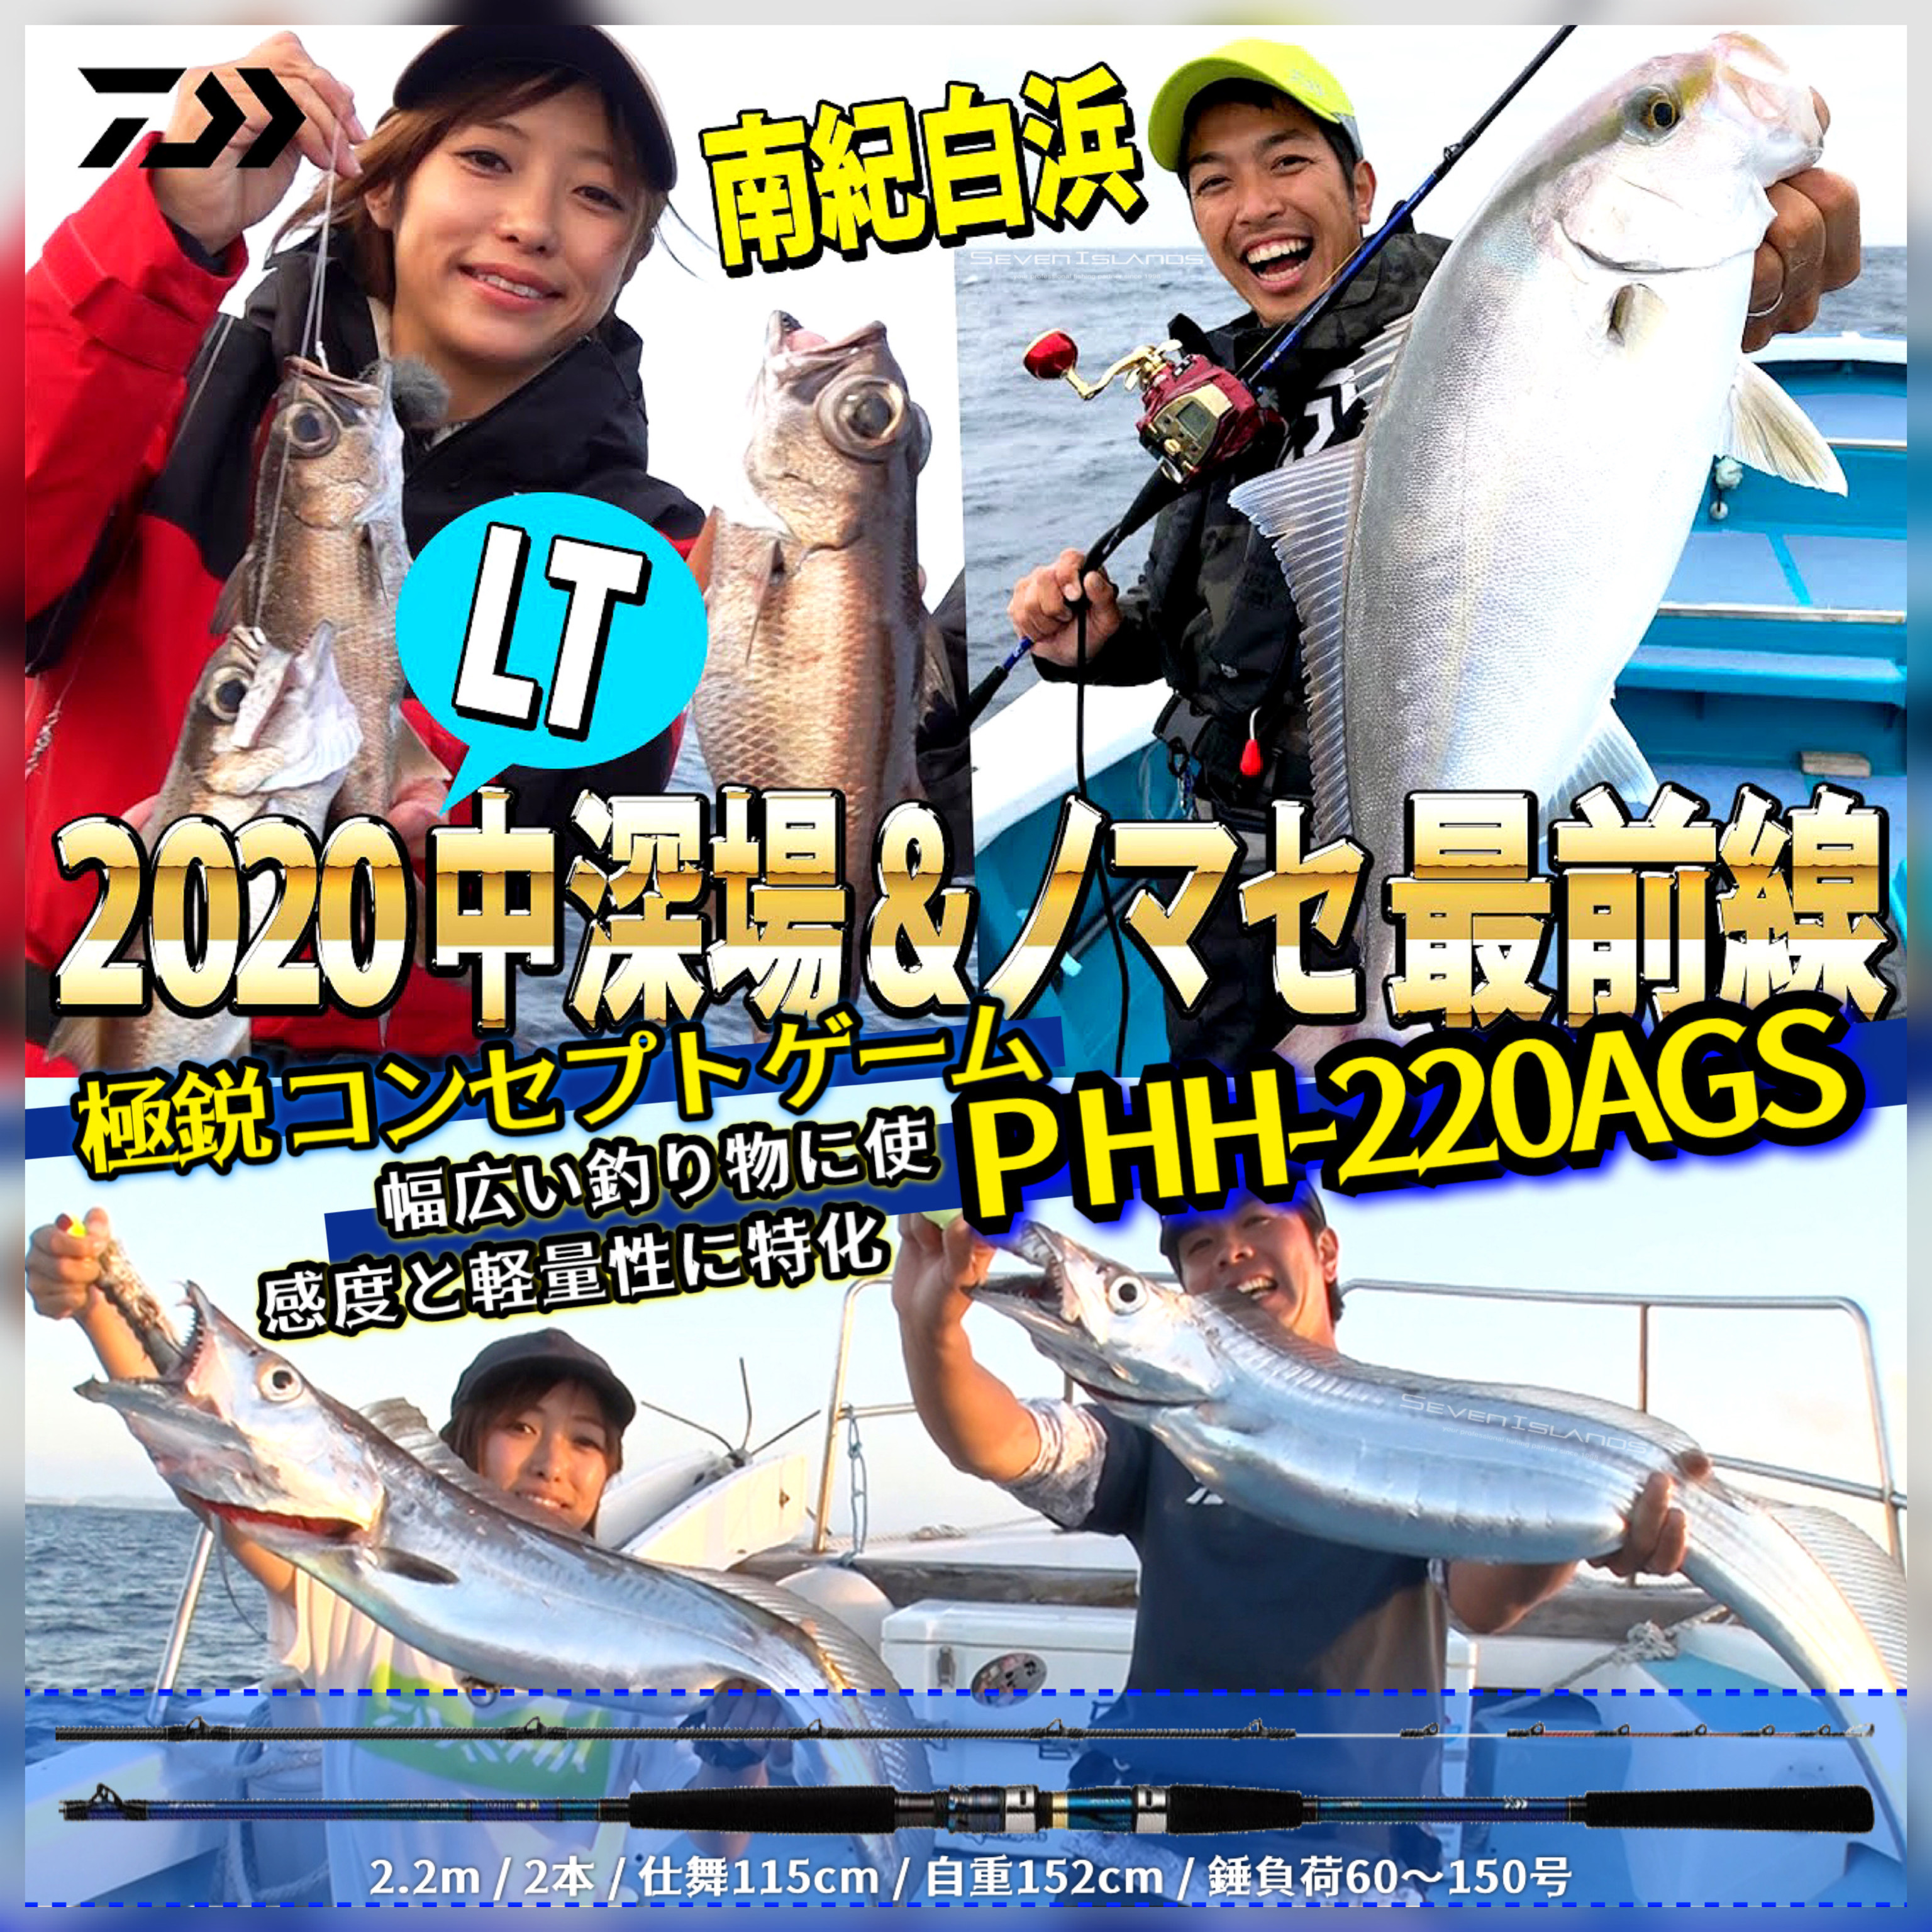 DAIWA KYOKUEI CONCEPT GAME P HH-220 AGS BOAT GAME ROD